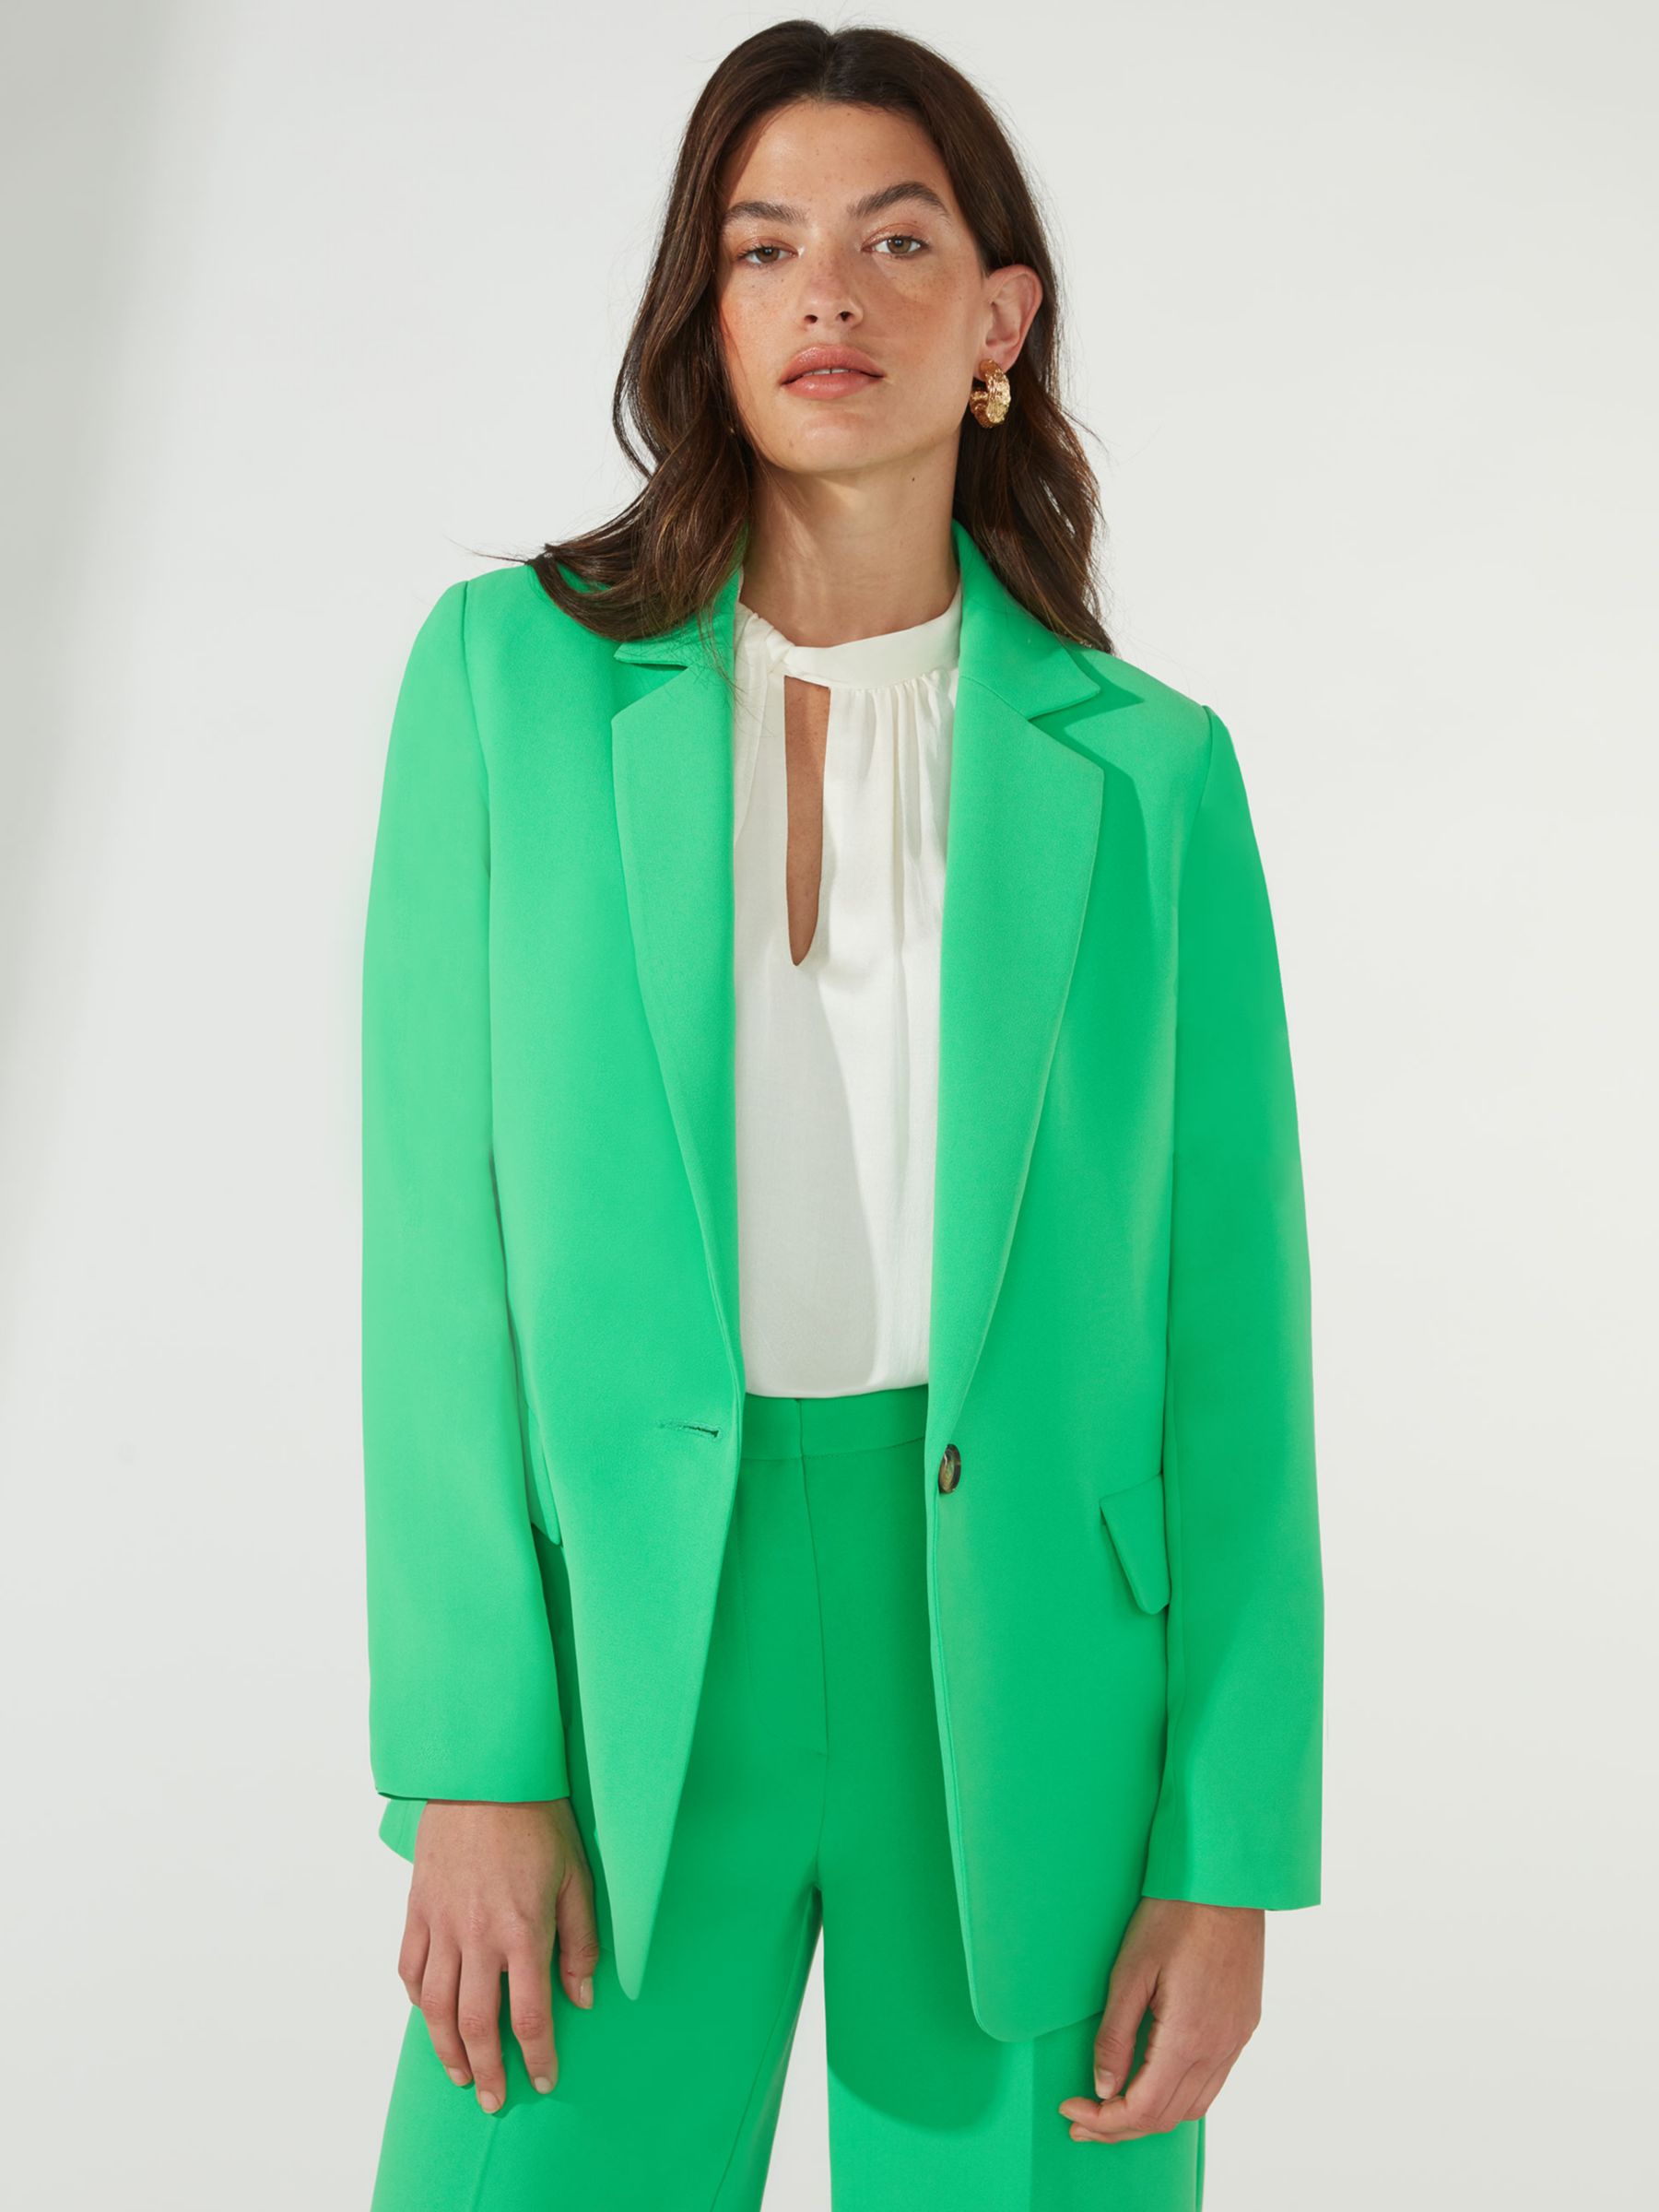 Ro&Zo Tailored Single Breasted Blazer, Green at John Lewis & Partners